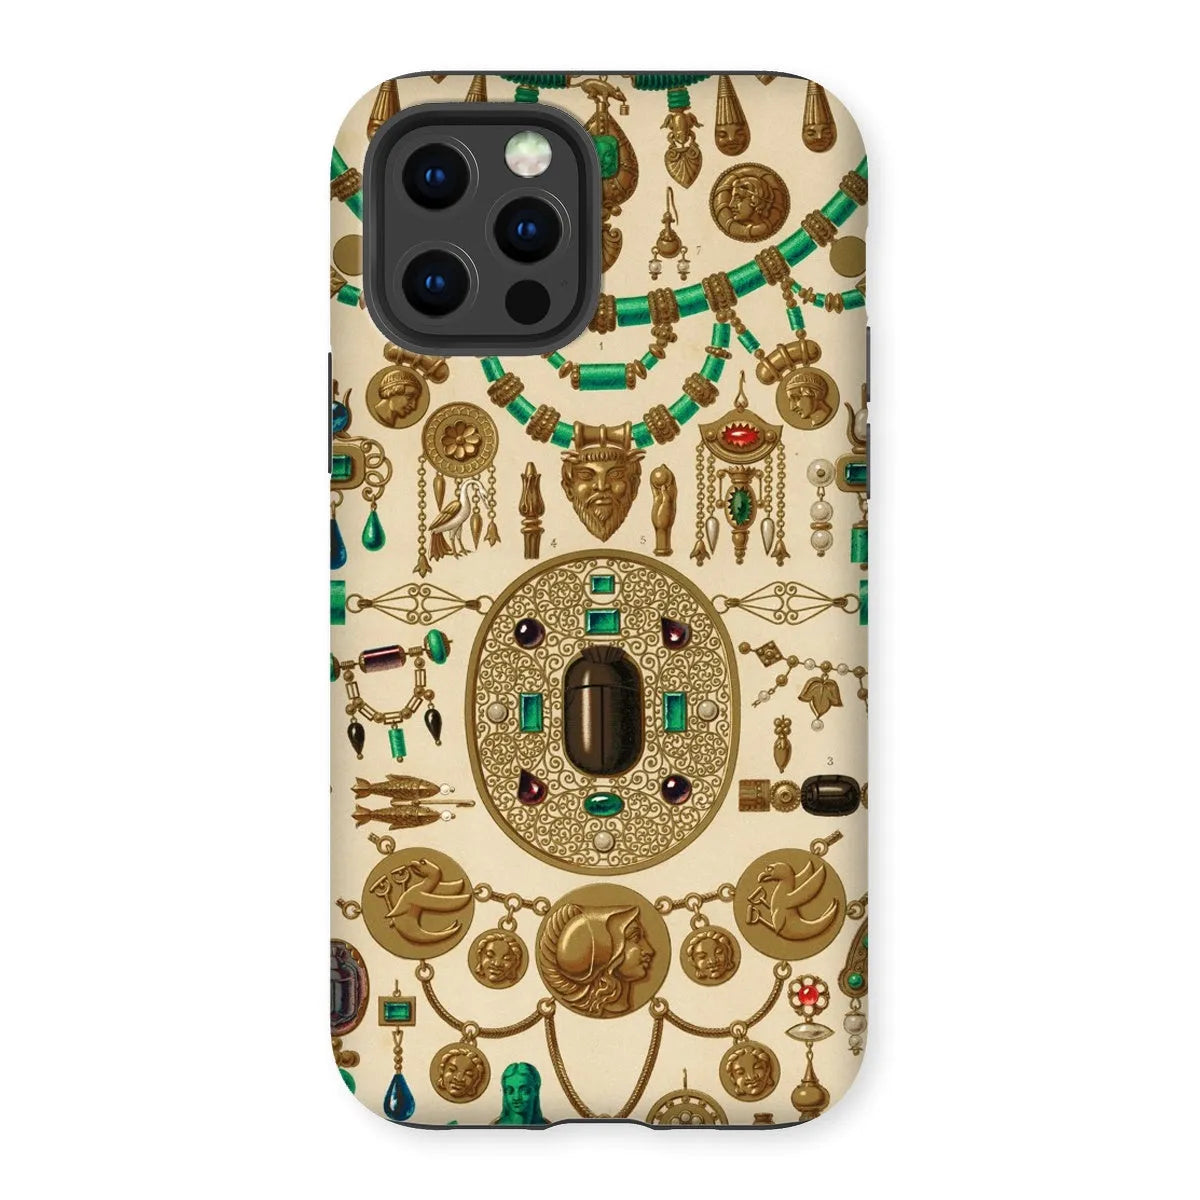 Etruscan Patterns From L’ornement Polychrome By Auguste Racinet Tough Phone Case - Iphone 12 Pro / Matte - Mobile